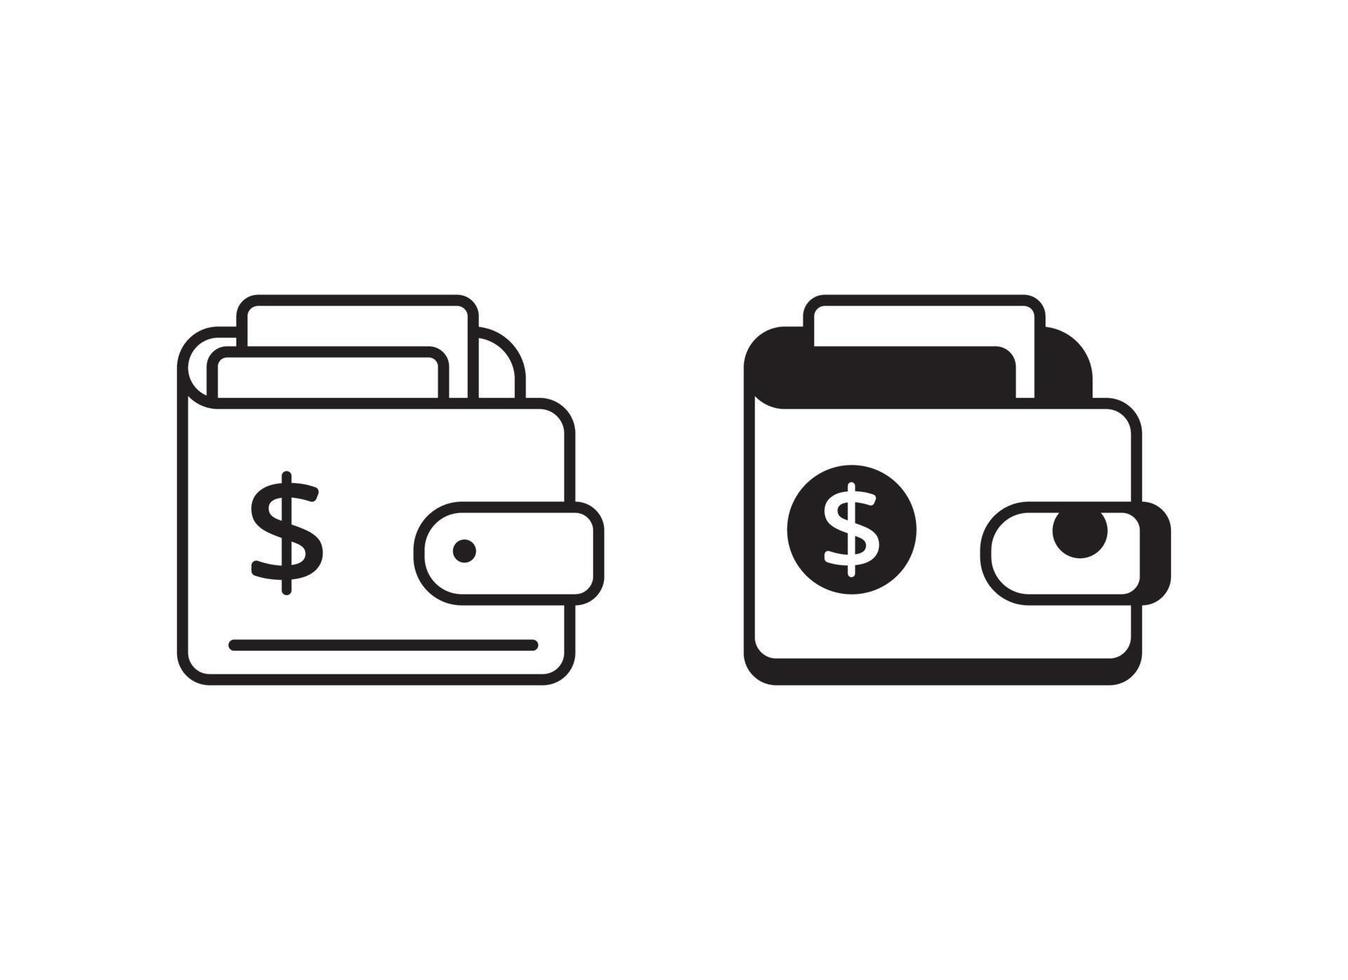 Wallet icon with black and white design on isolated background vector